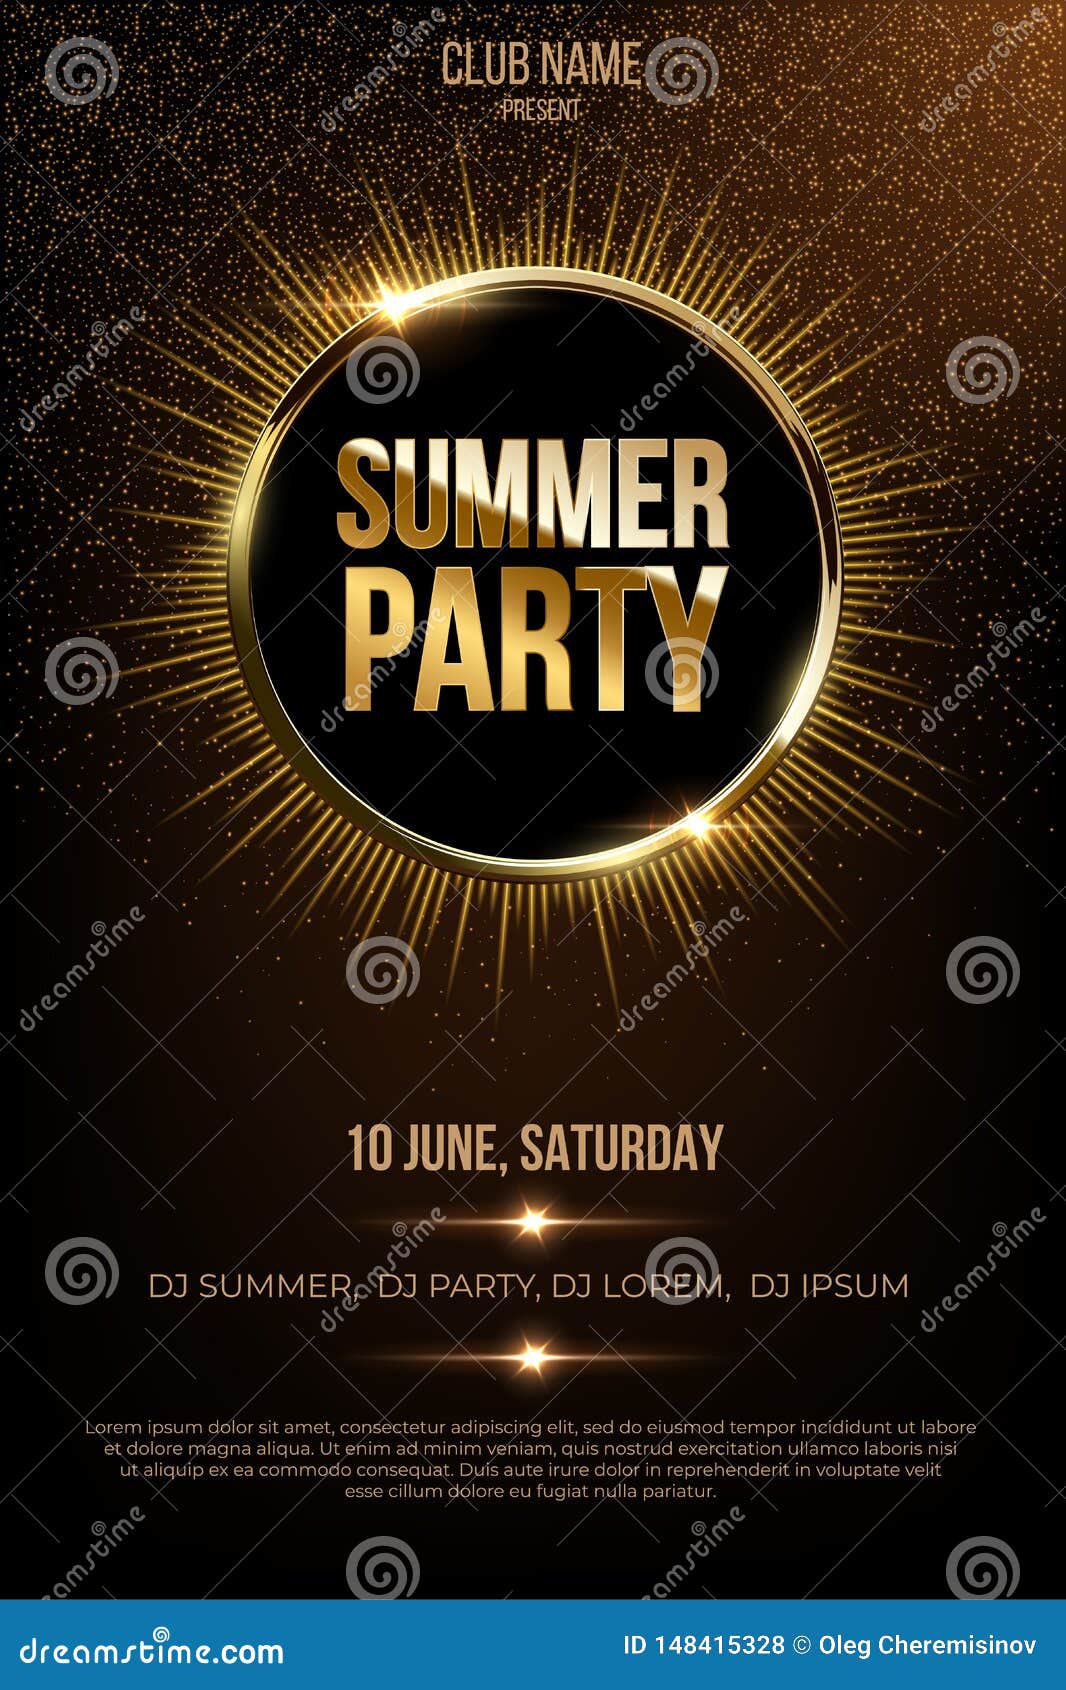 Summer Party Flyer Template Golden Metal Words And Solar Eclipse On Dark Background Stock Vector Illustration Of Modern Concert